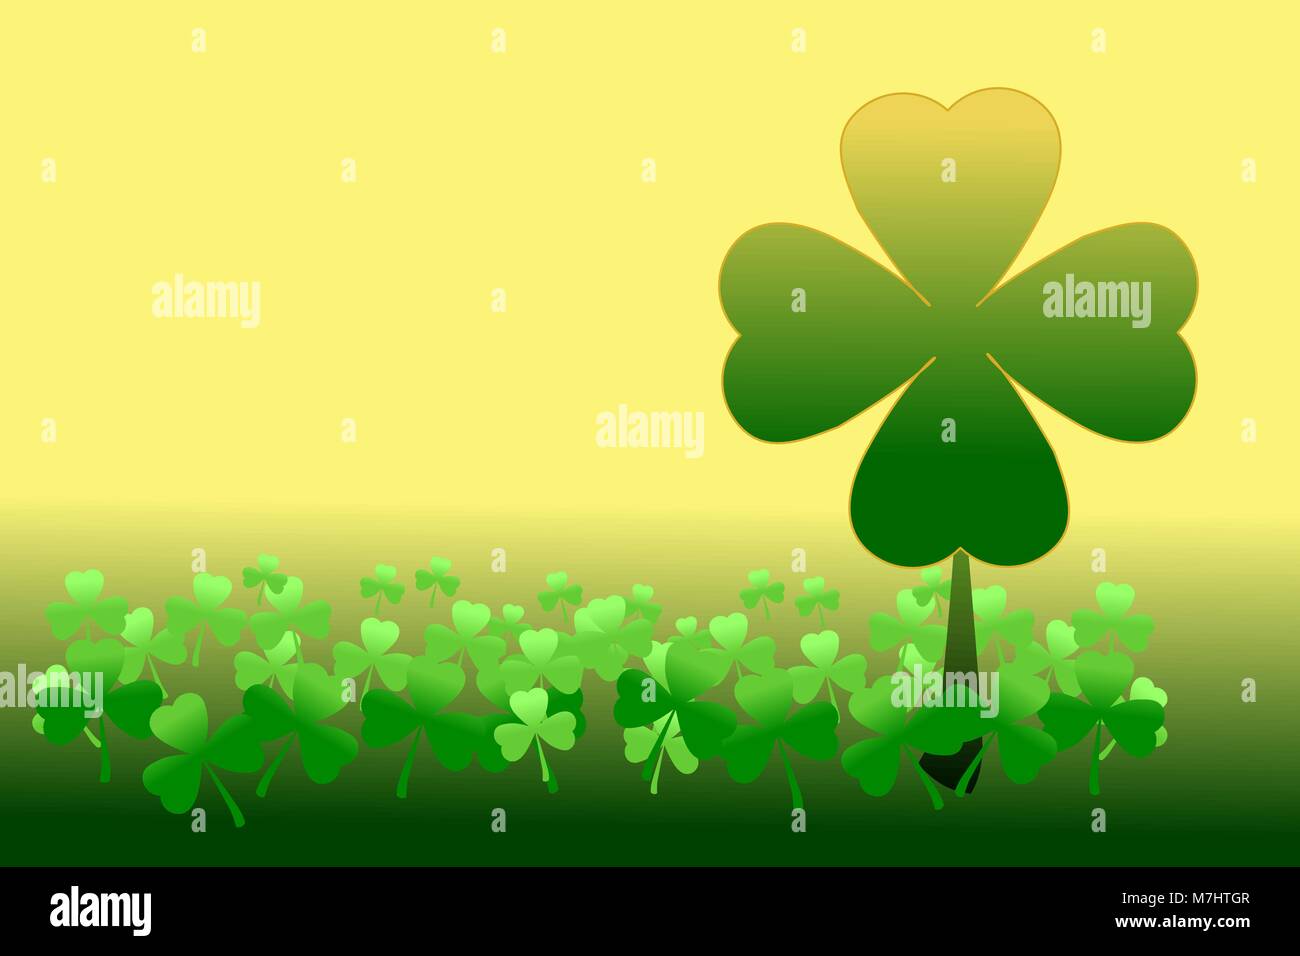 Happy Saint Patrick's day. Pattern of shamrocks, 4-leaf clover among 3-leaf clovers on gold and green gradient background. Vector illustration. Stock Vector